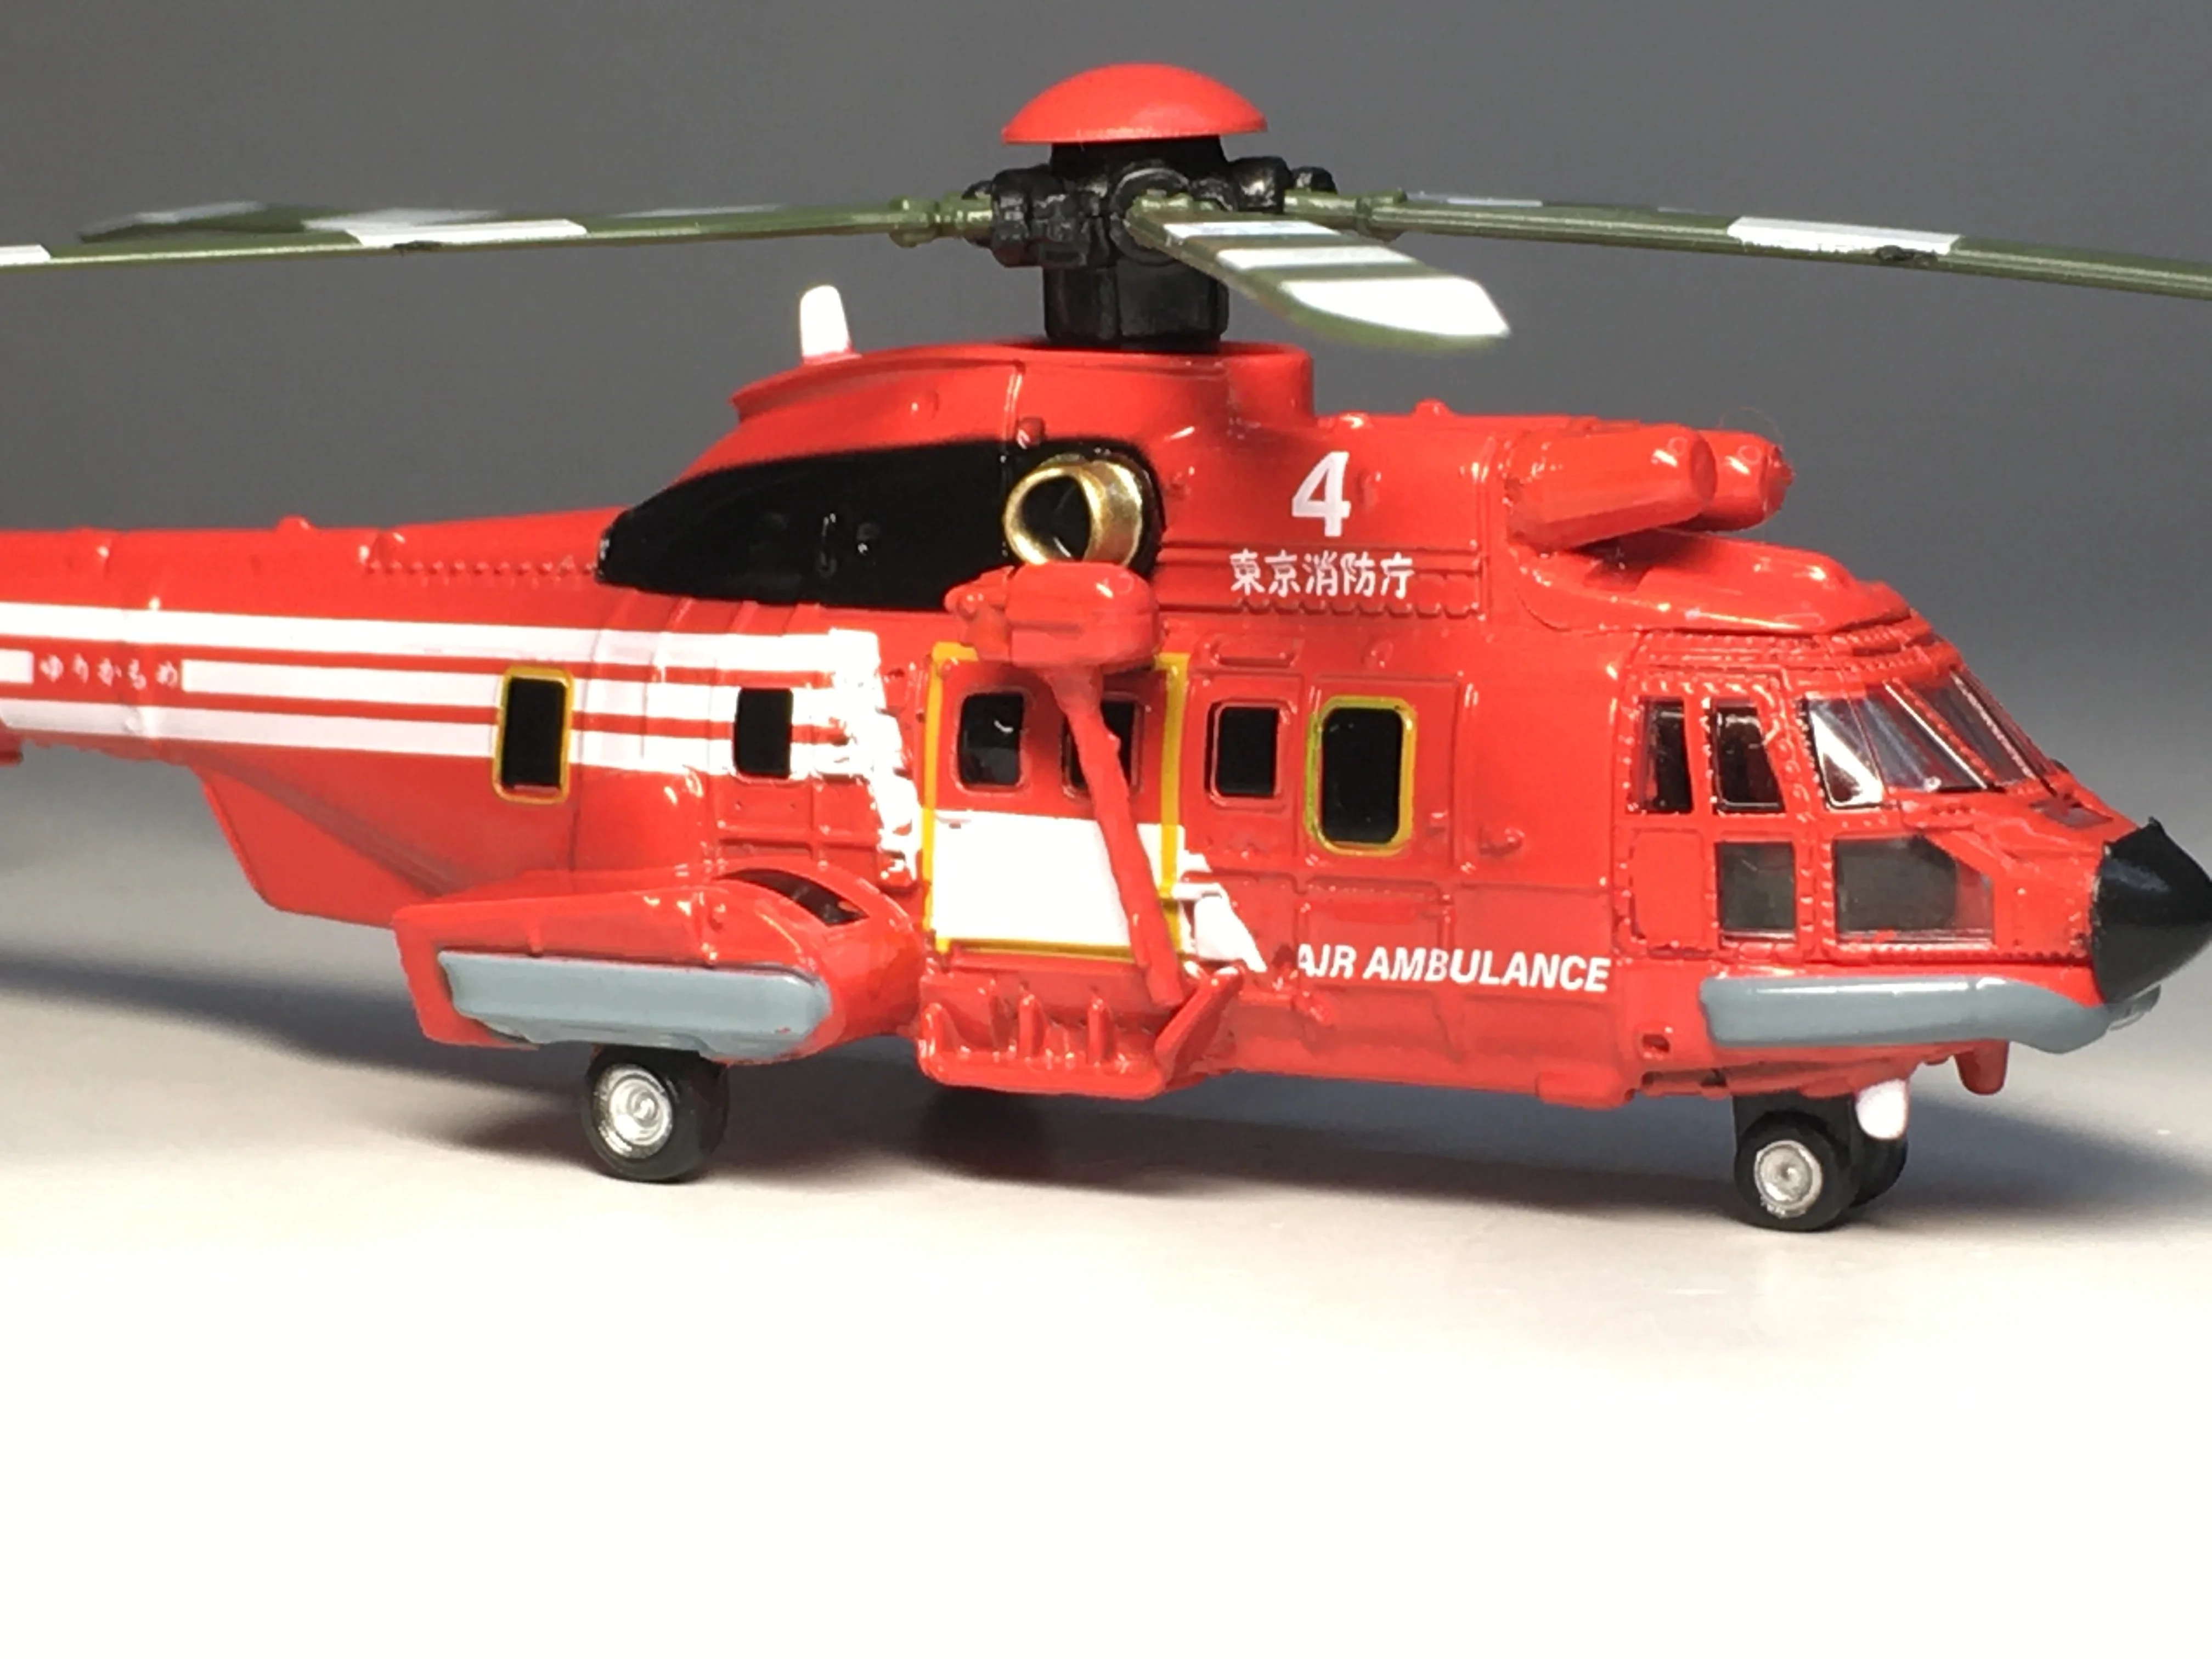 Tiny City 23 Taiwan Super Puma Helicopter Rescue Emergency 1:144 